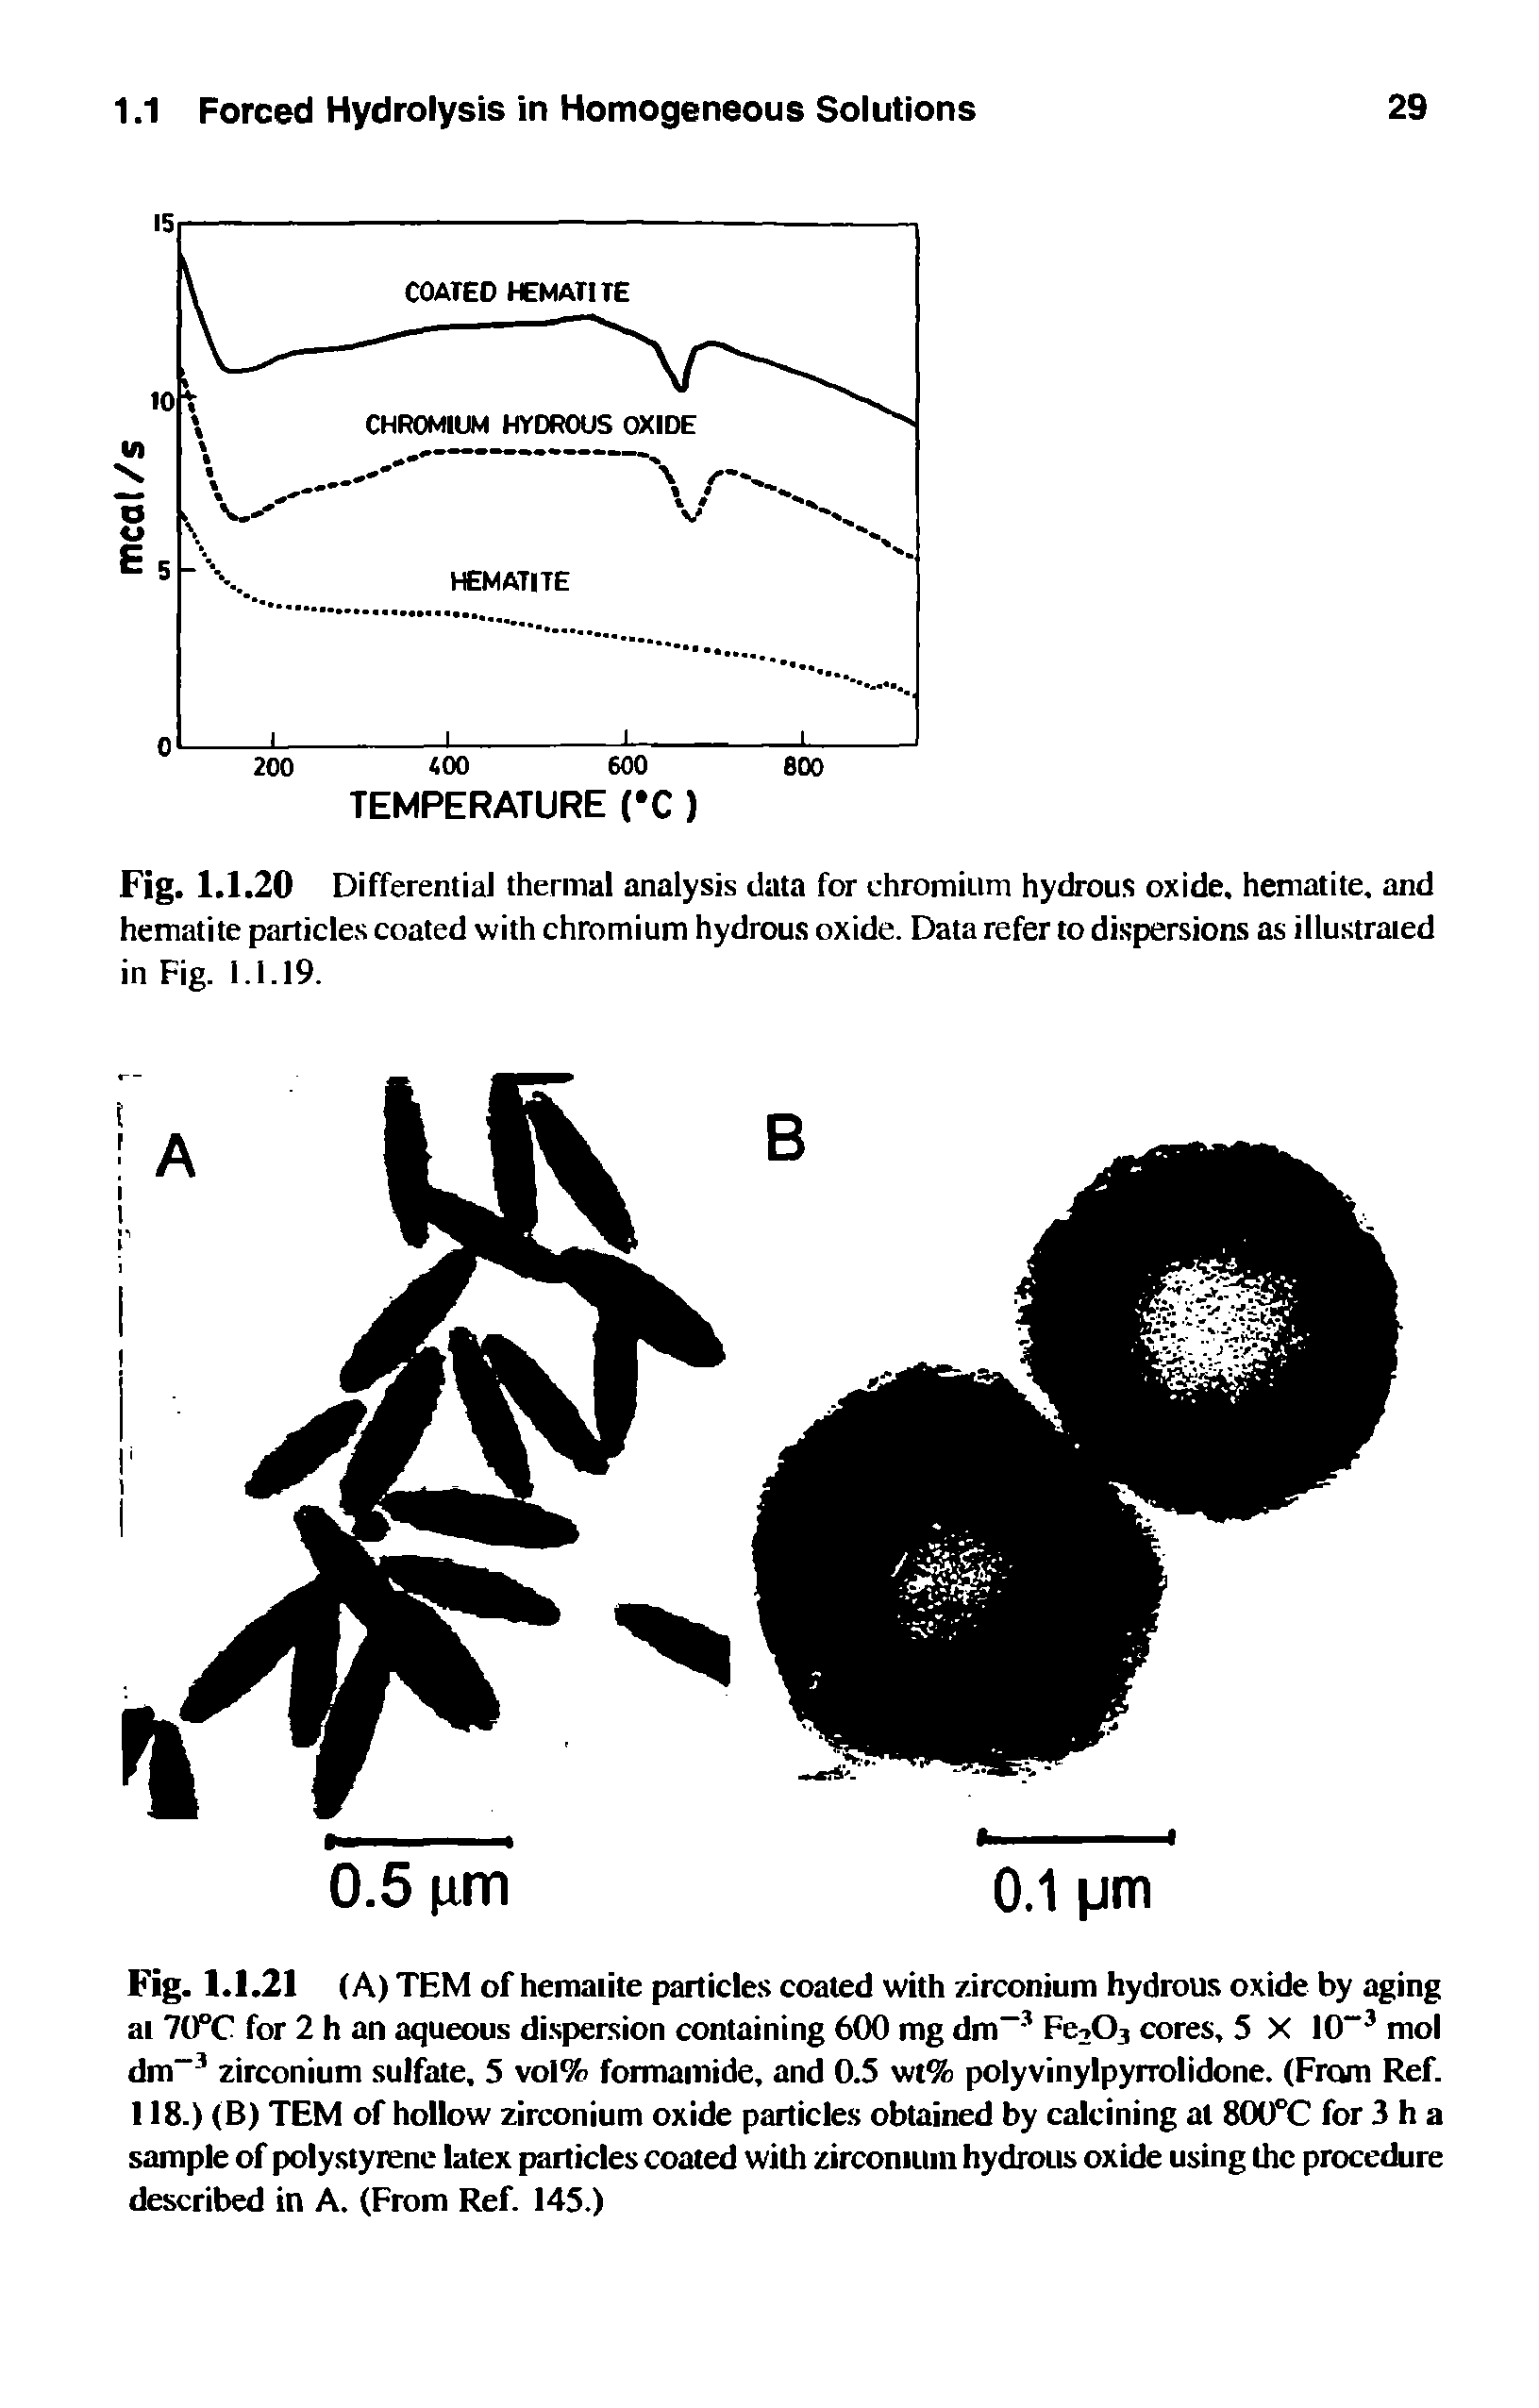 Fig. 1.1.20 Differential thermal analysis data for chromium hydrous oxide, hematite, and hematite particles coated with chromium hydrous oxide. Data refer to dispersions as illustrated in Fig. 1.1.19.